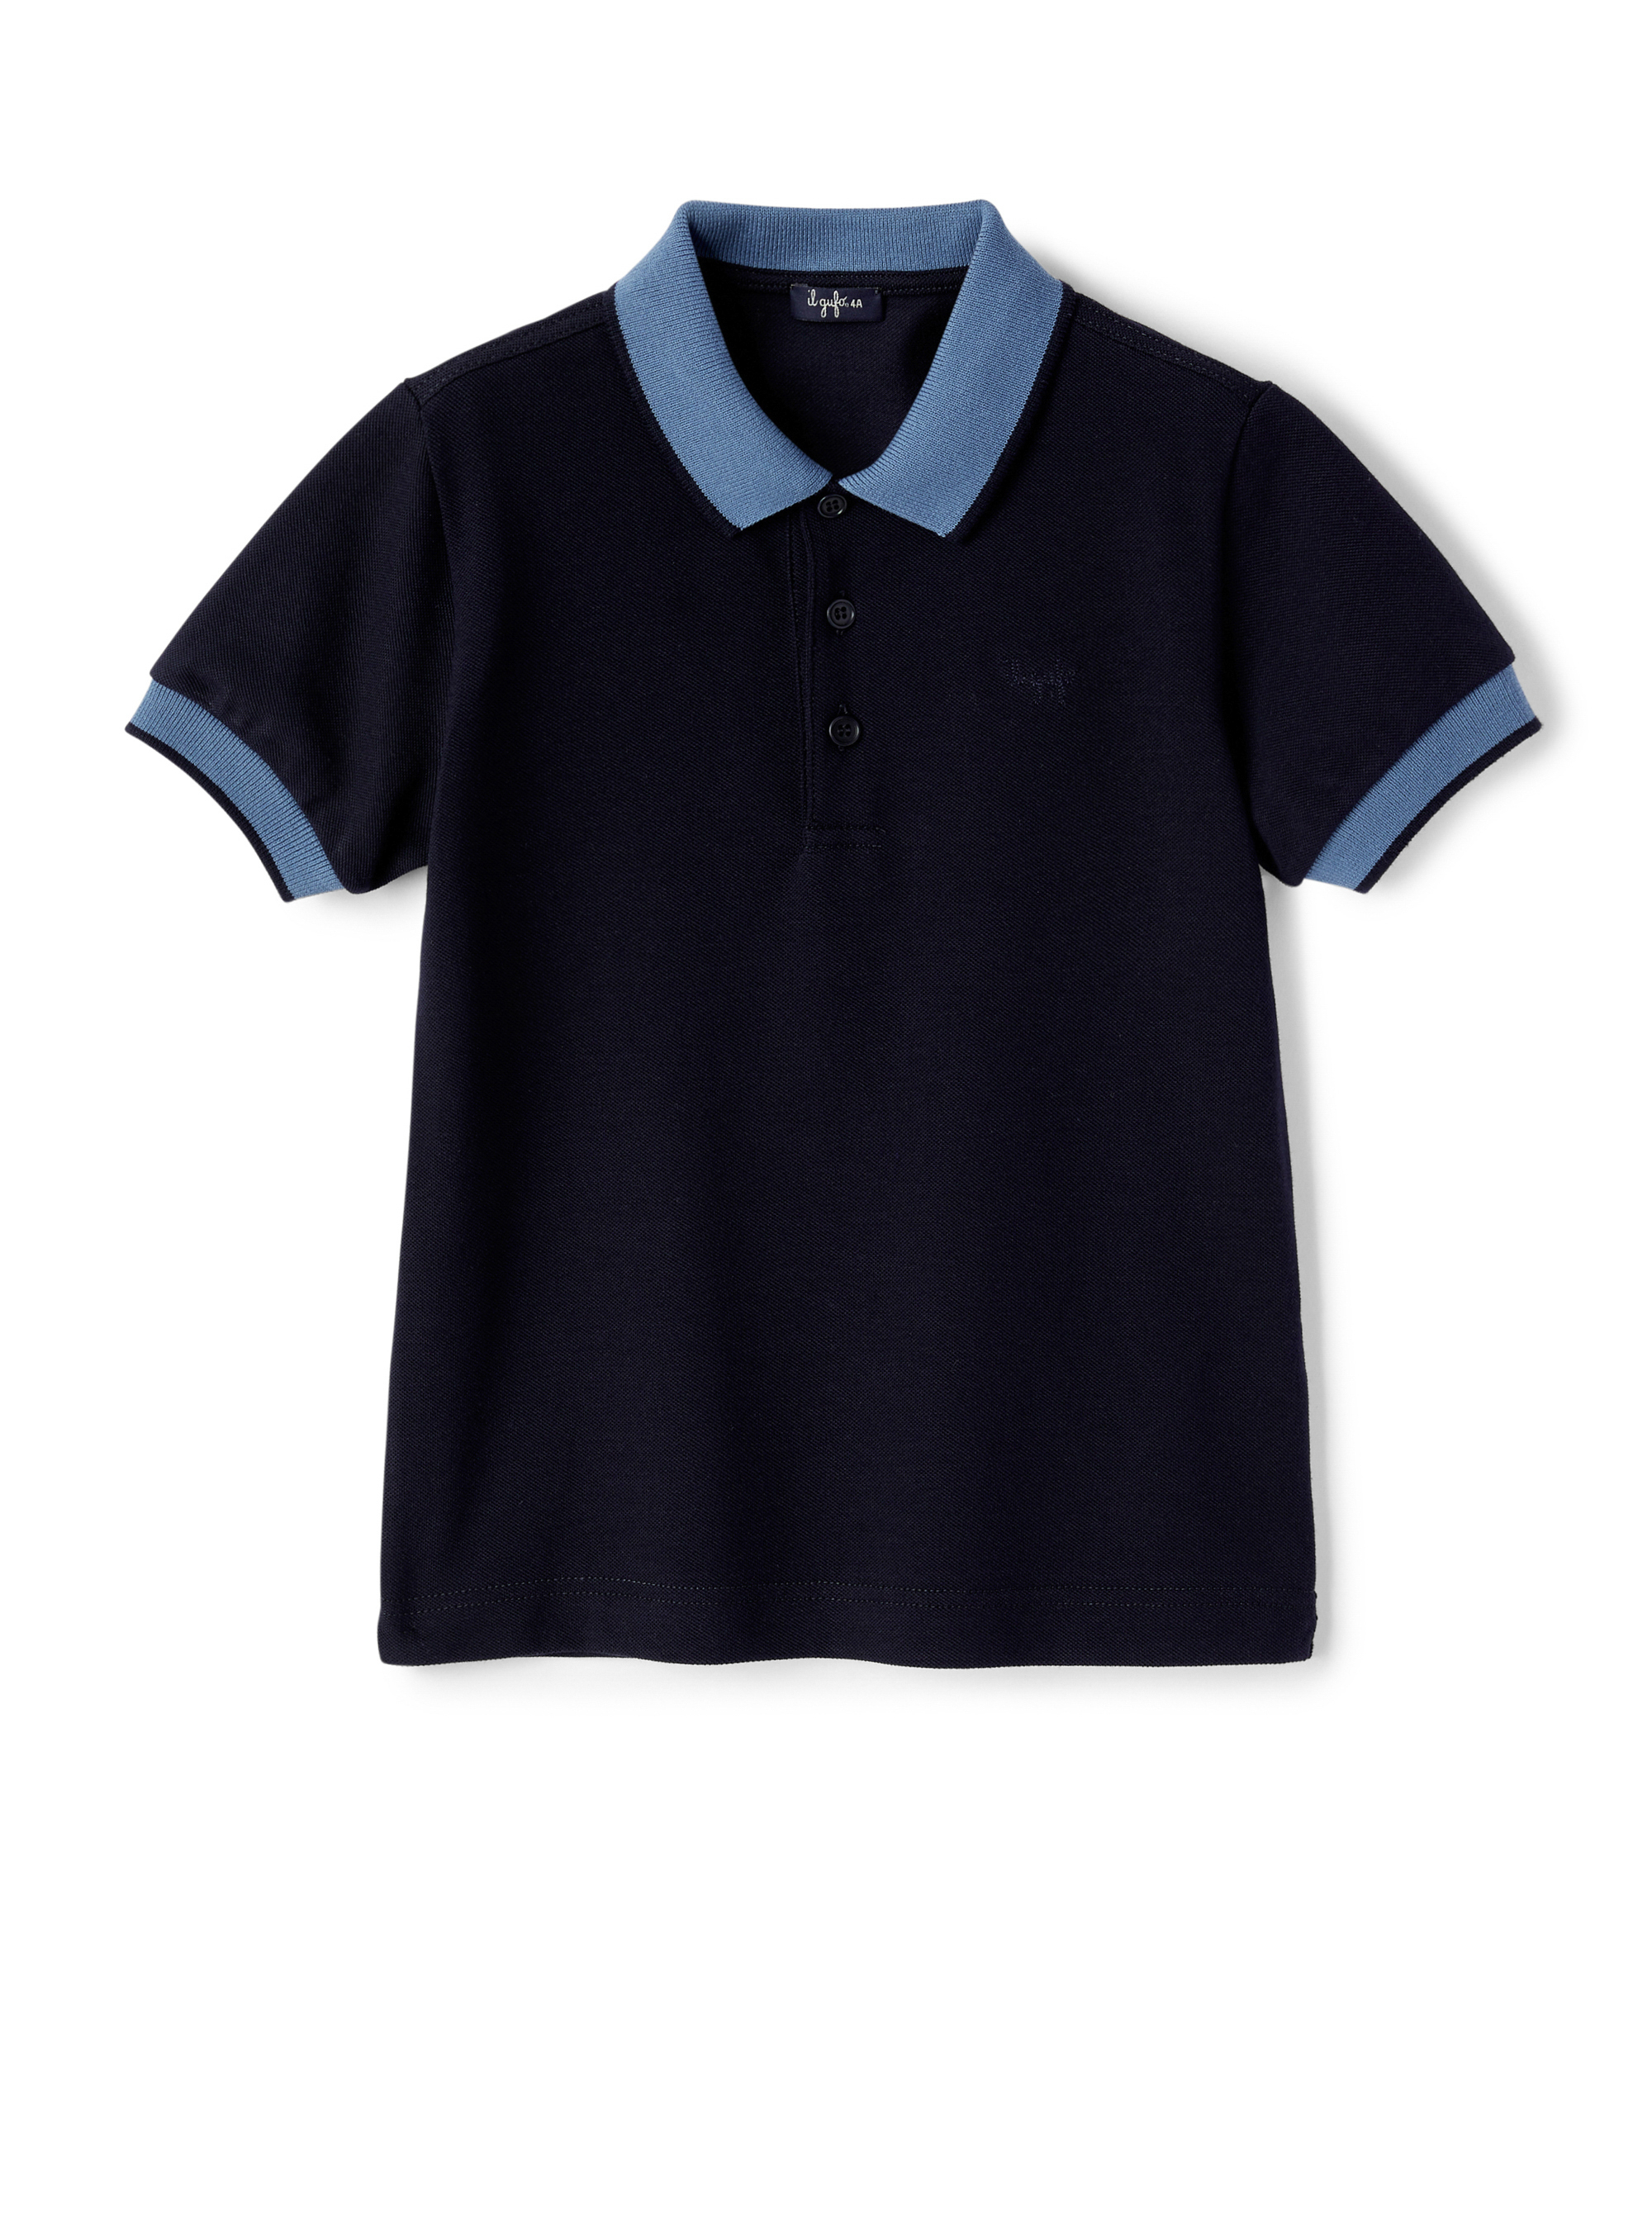 Piquet polo shirt with contrasting details - Blue | Il Gufo